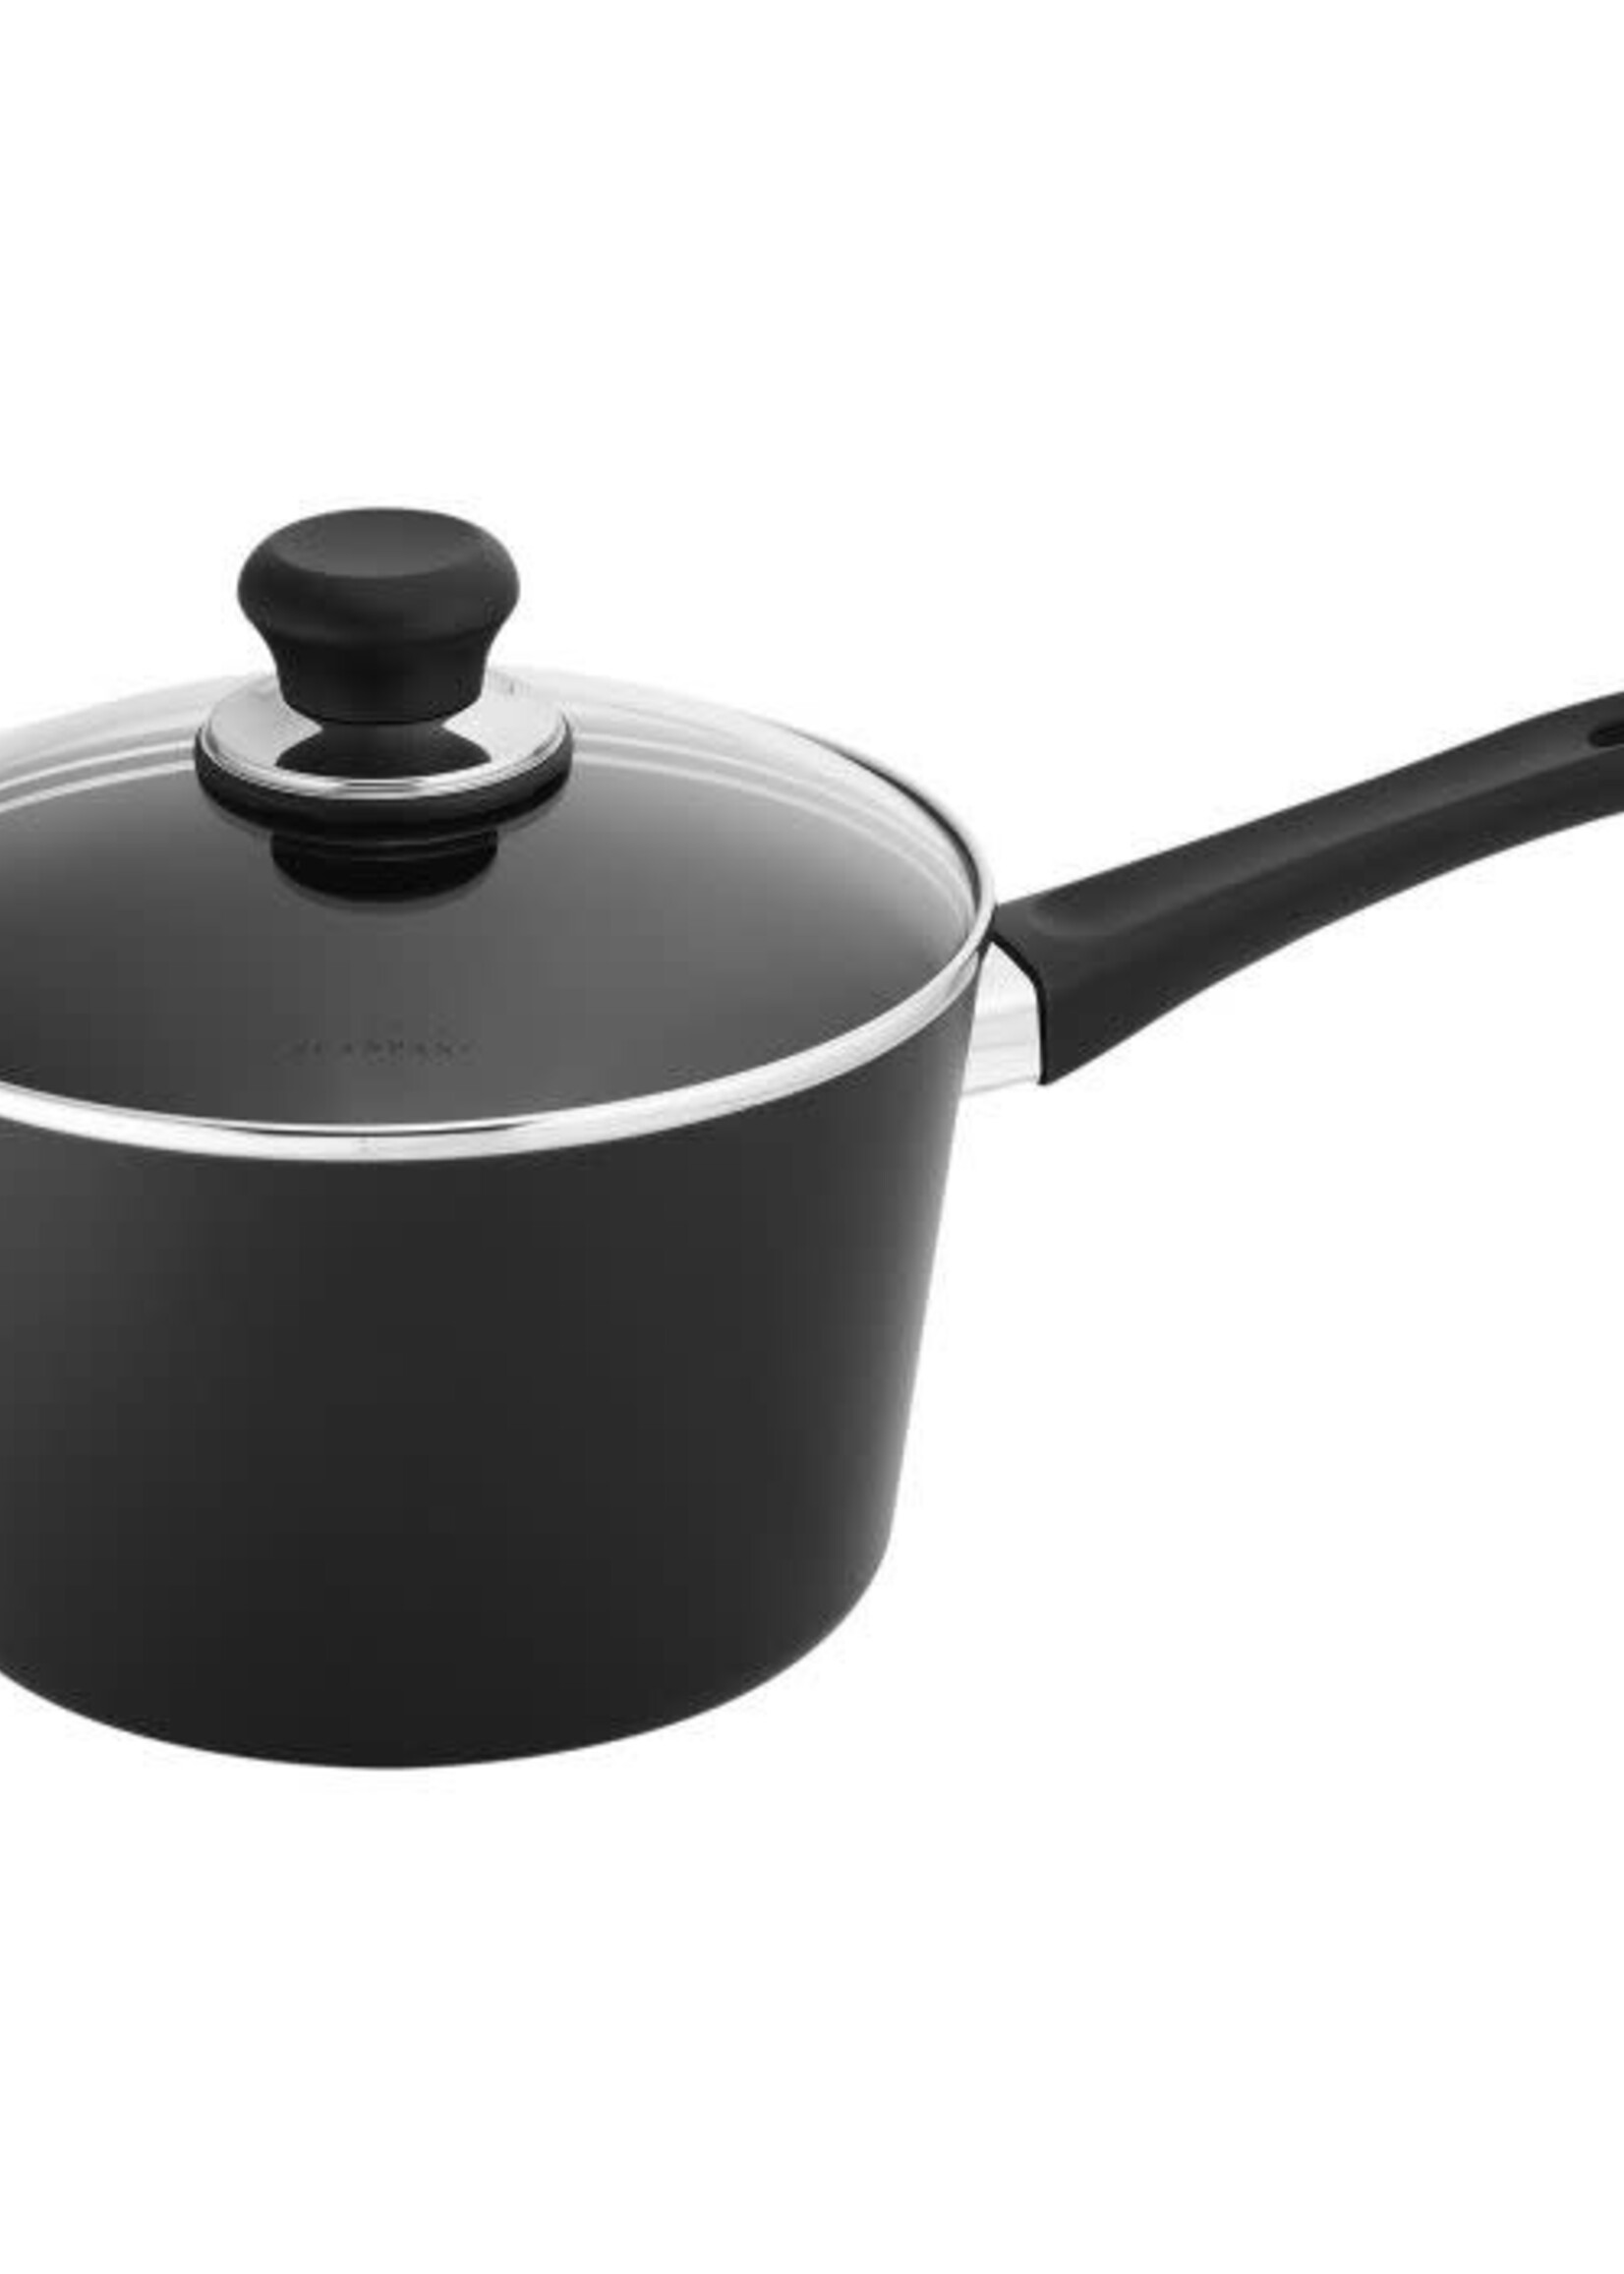 SCANPAN 3.2 Qt Induction Covered Saucepan Spring Promo